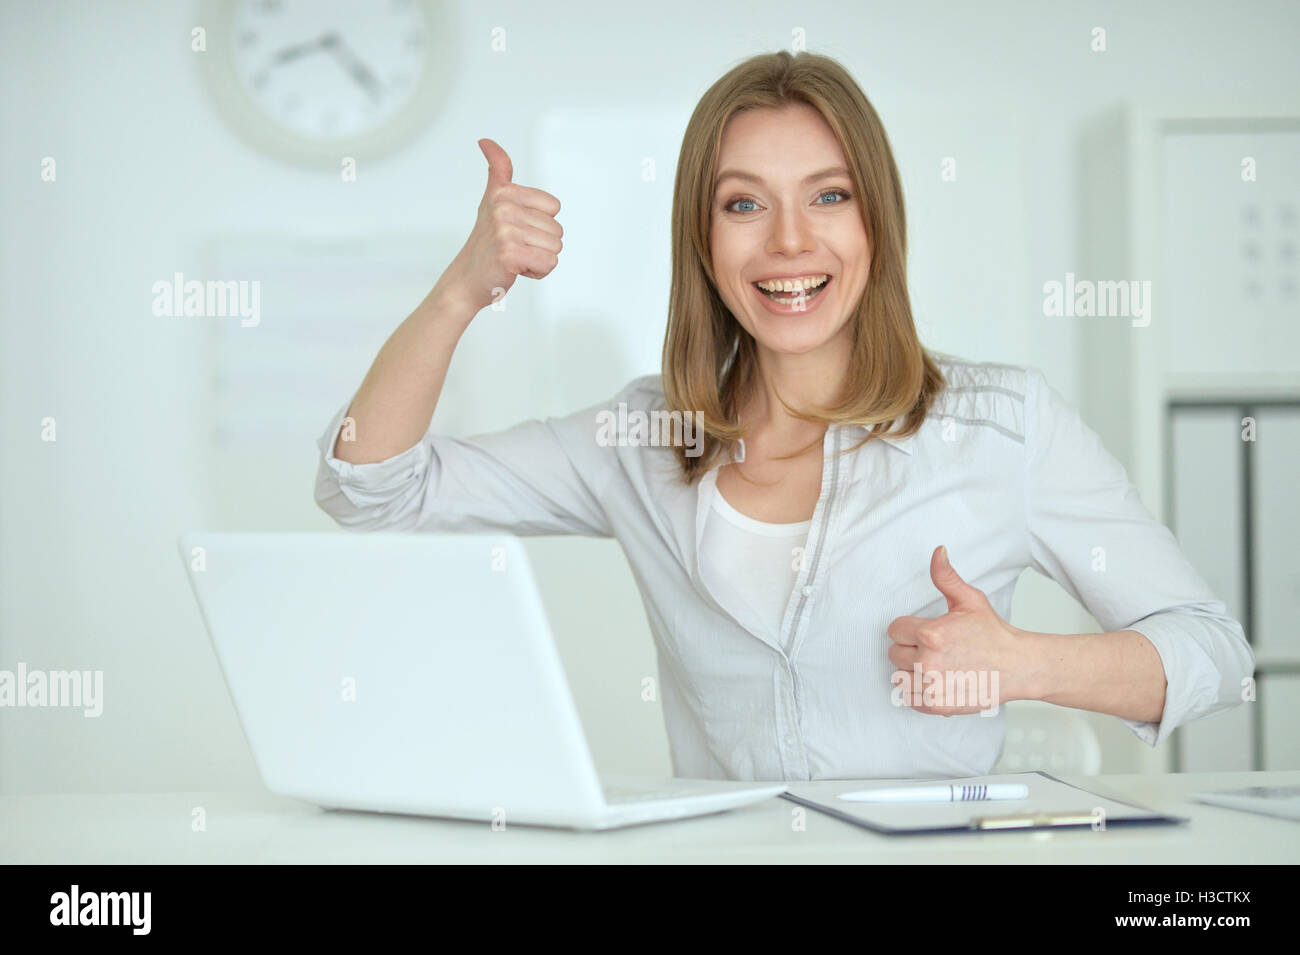 young woman   with laptop Stock Photo